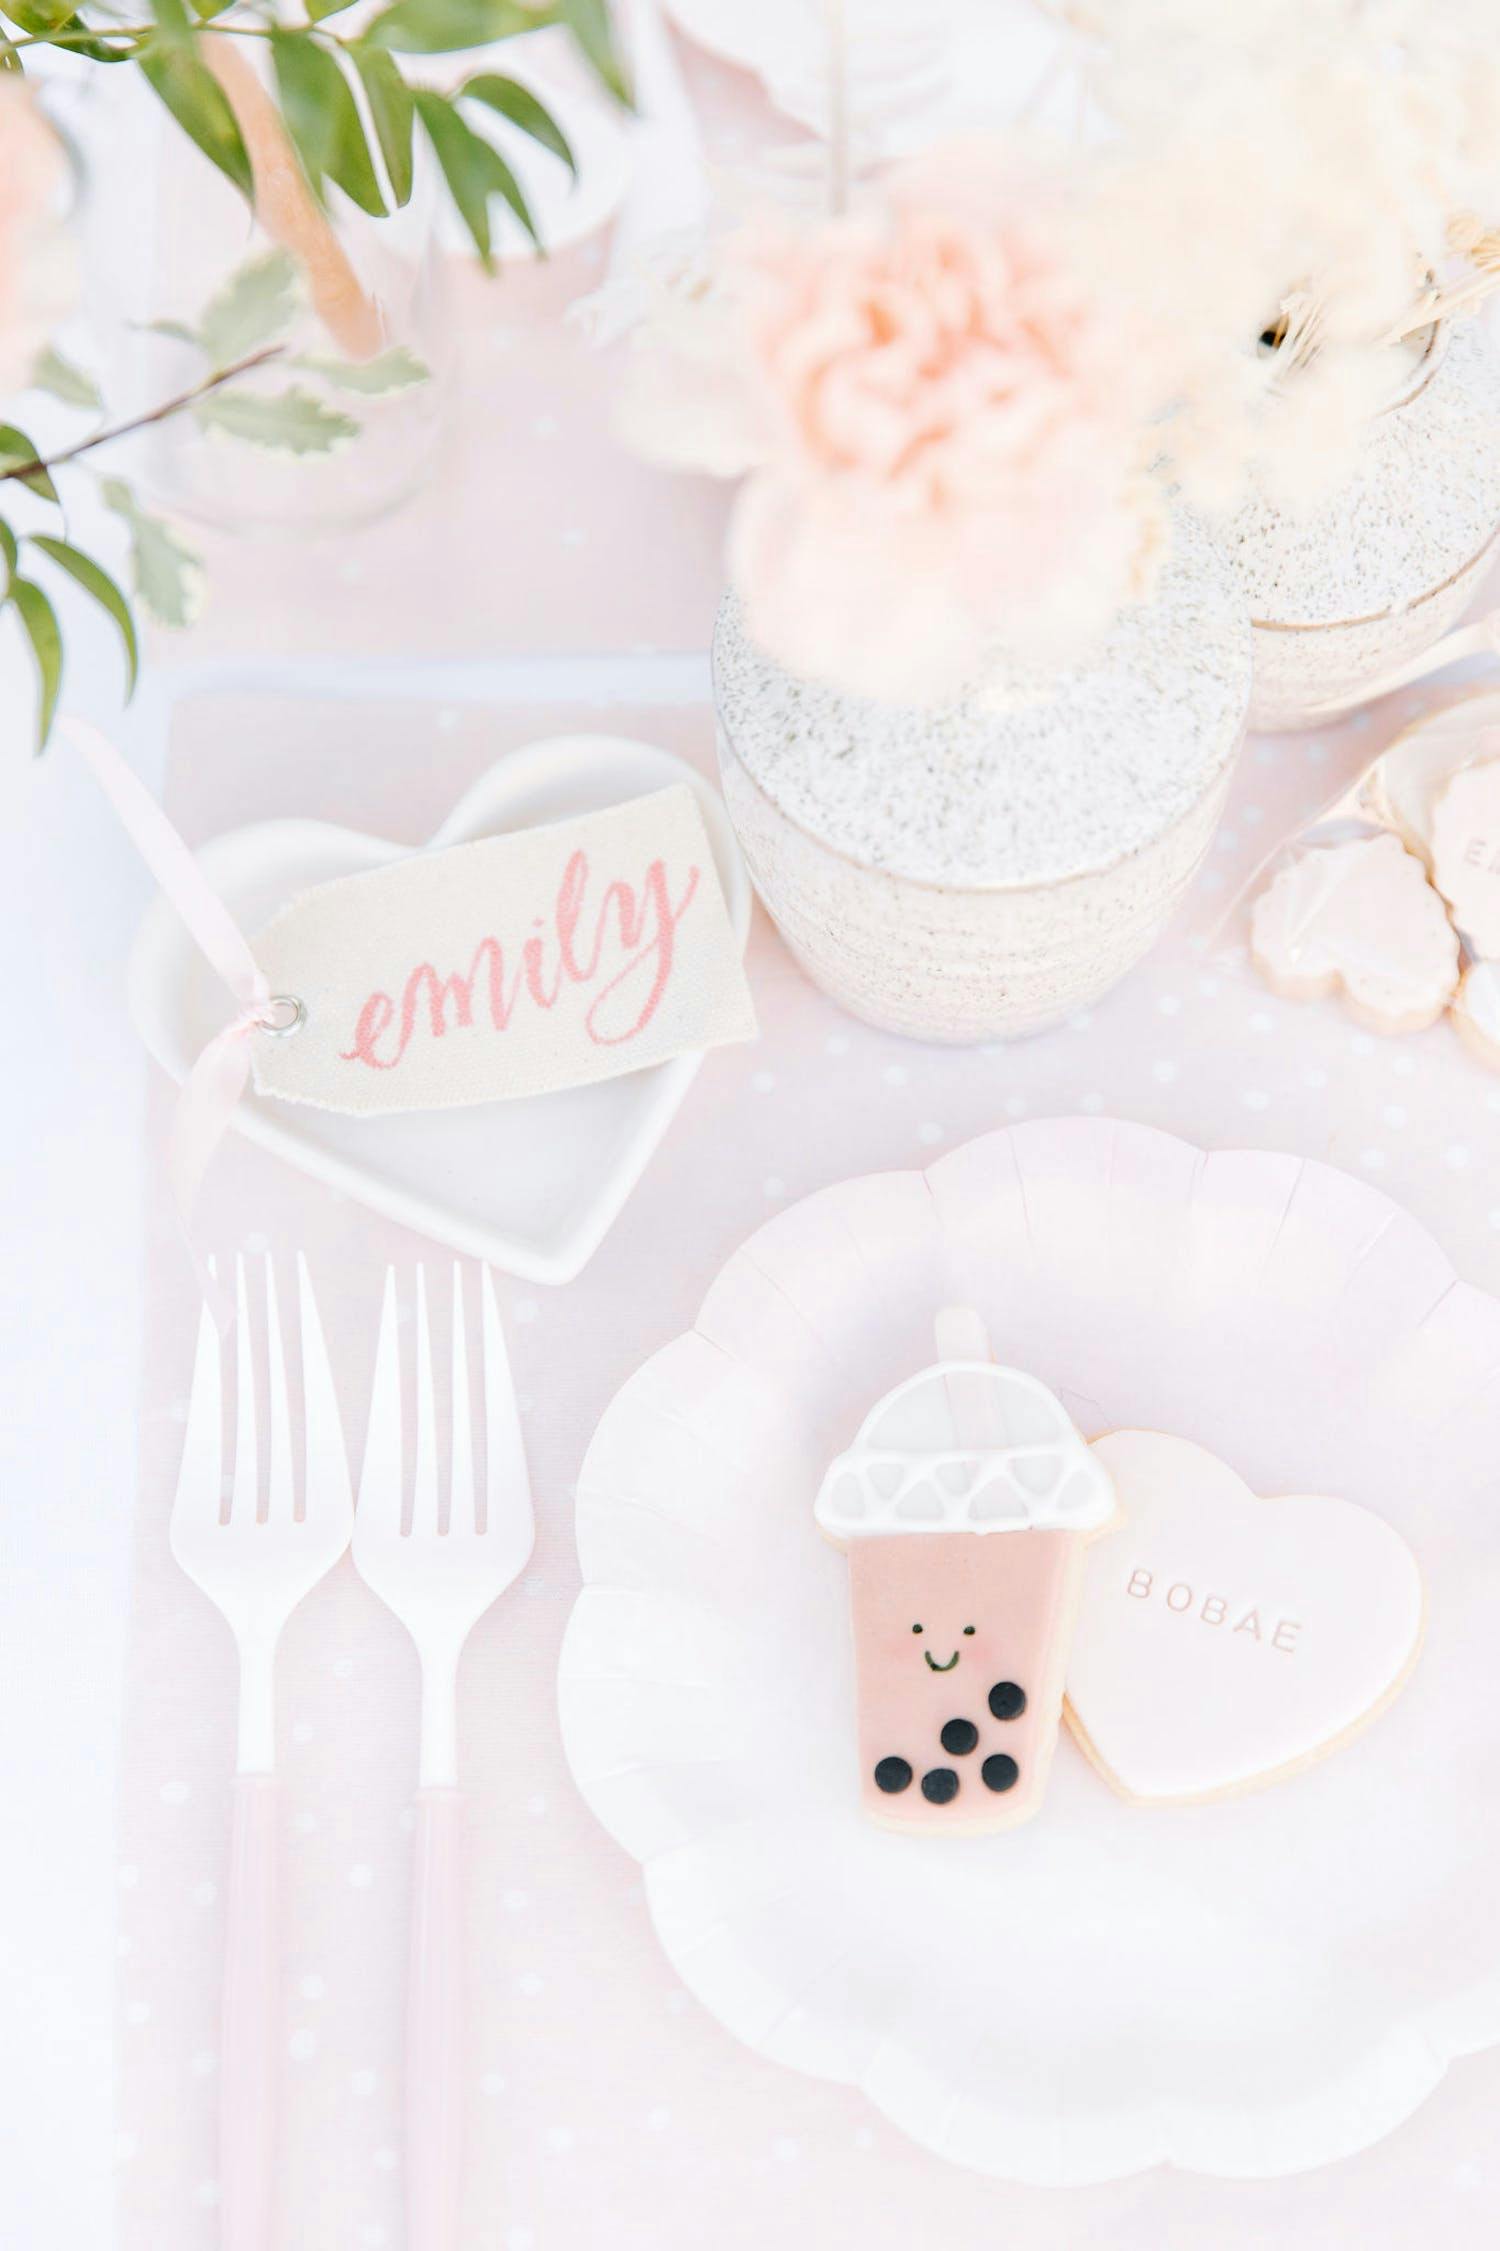 Boba Tea Themed Celebration With Pastel Pink and White Décor and Smily Faced Boba Tea Desserts | PartySlate